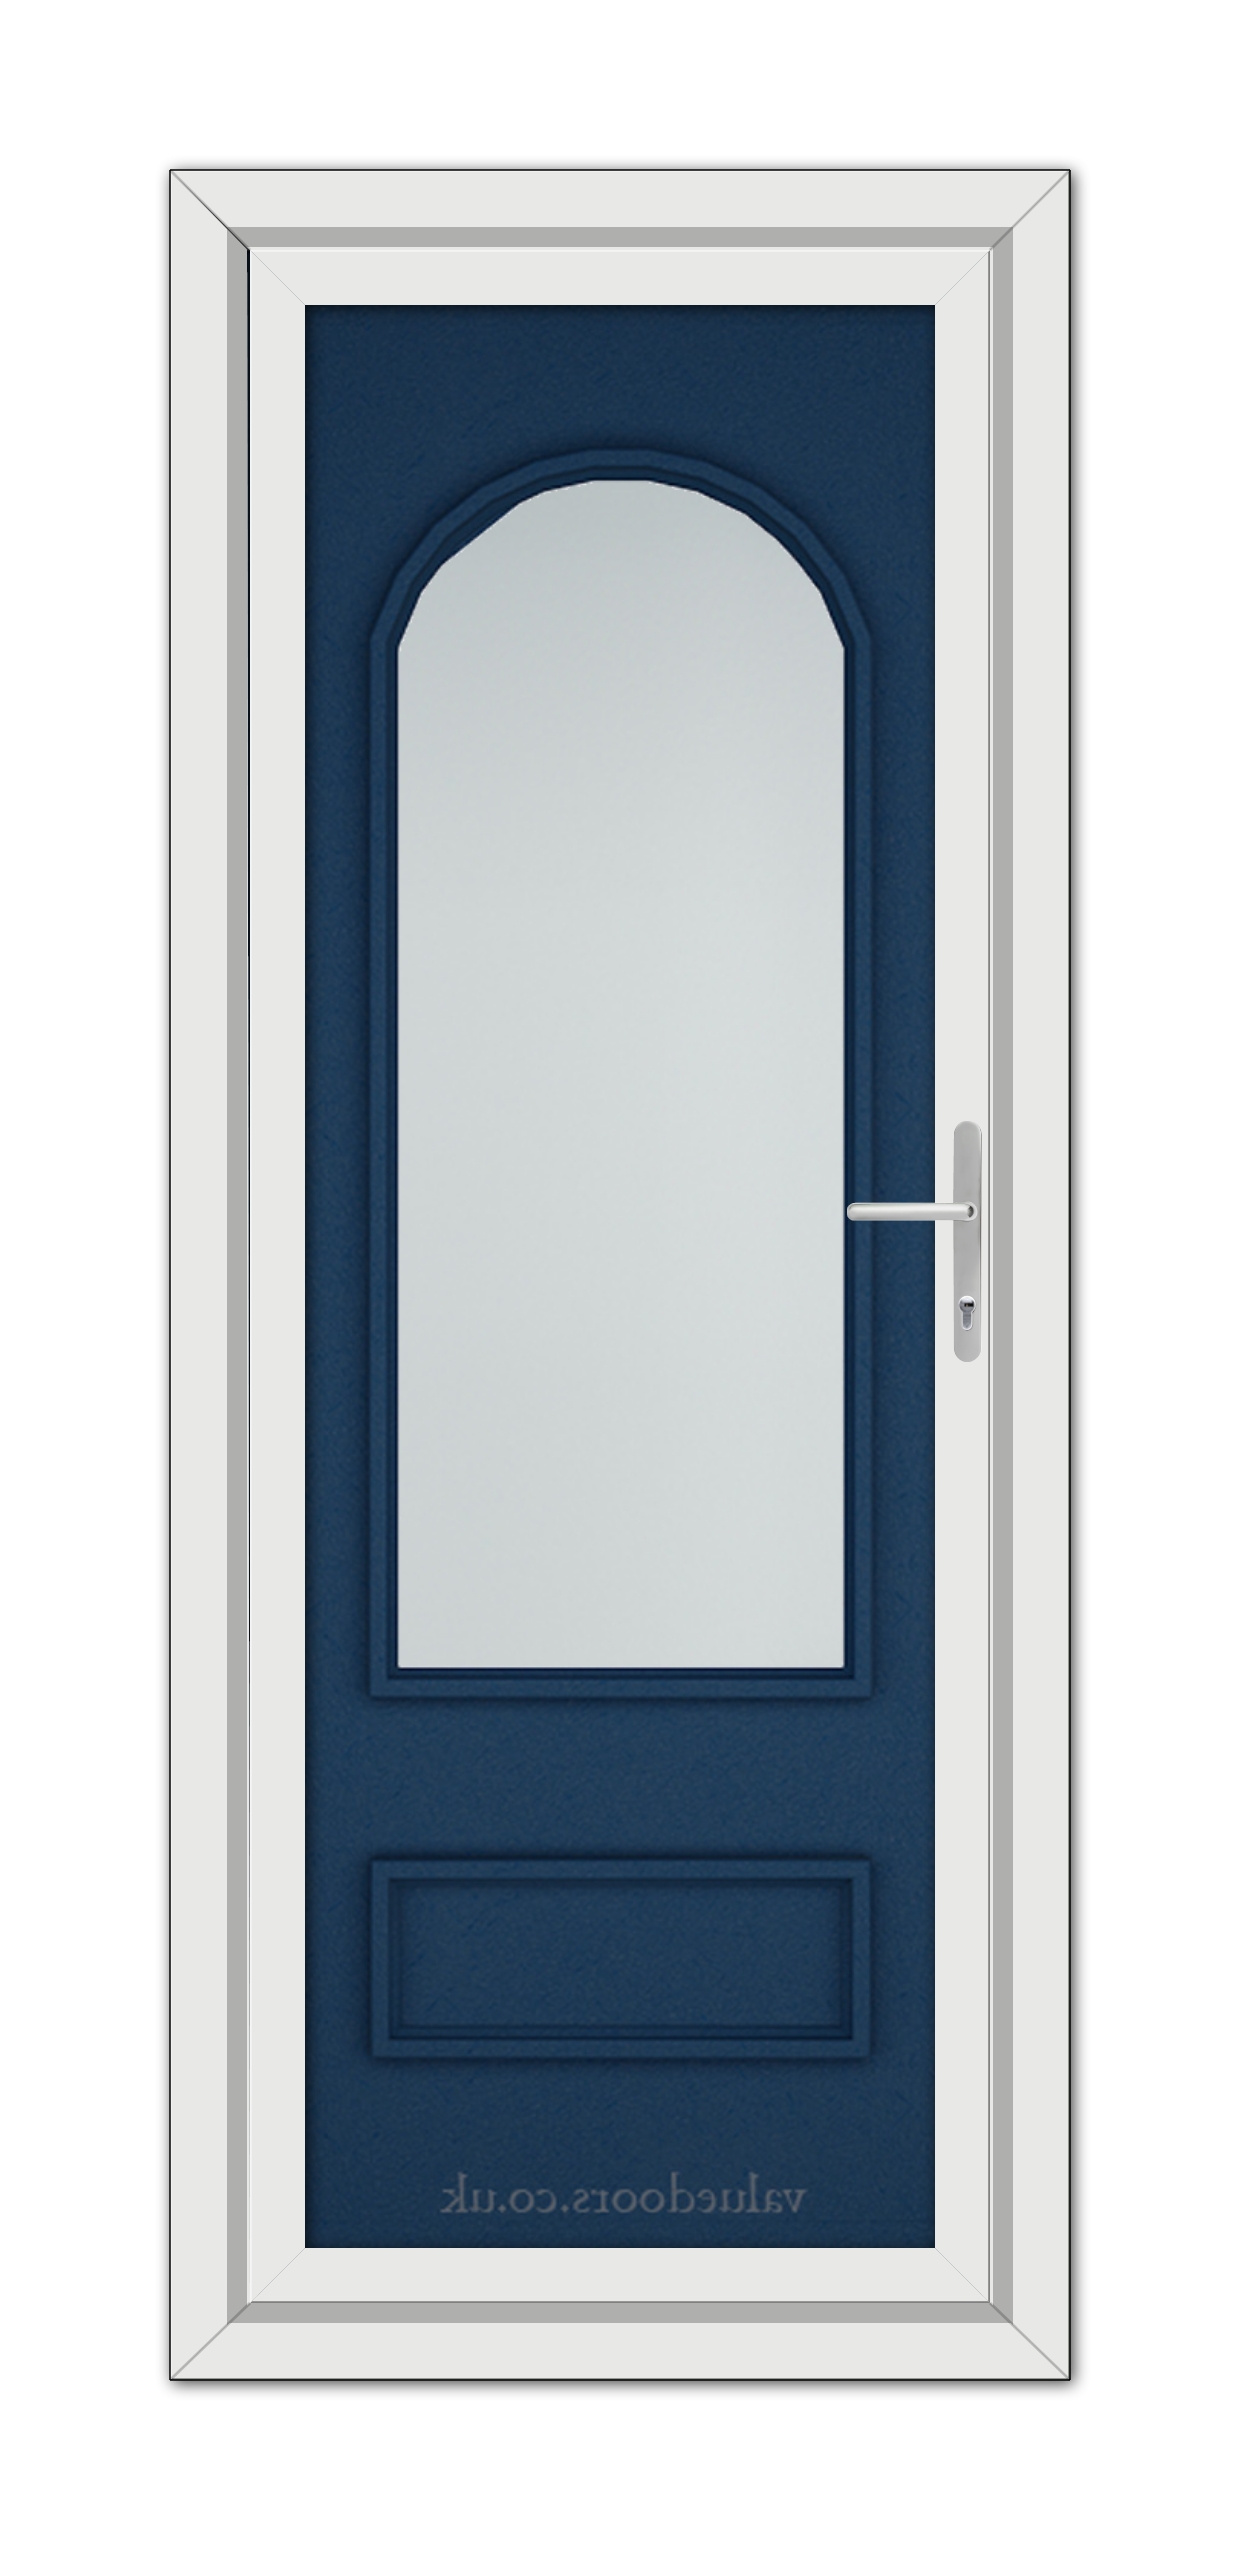 A vertical image of a closed Blue Canterbury uPVC Door with an arched window at the top, silver handle on the right, and white door frame, set against a white background.